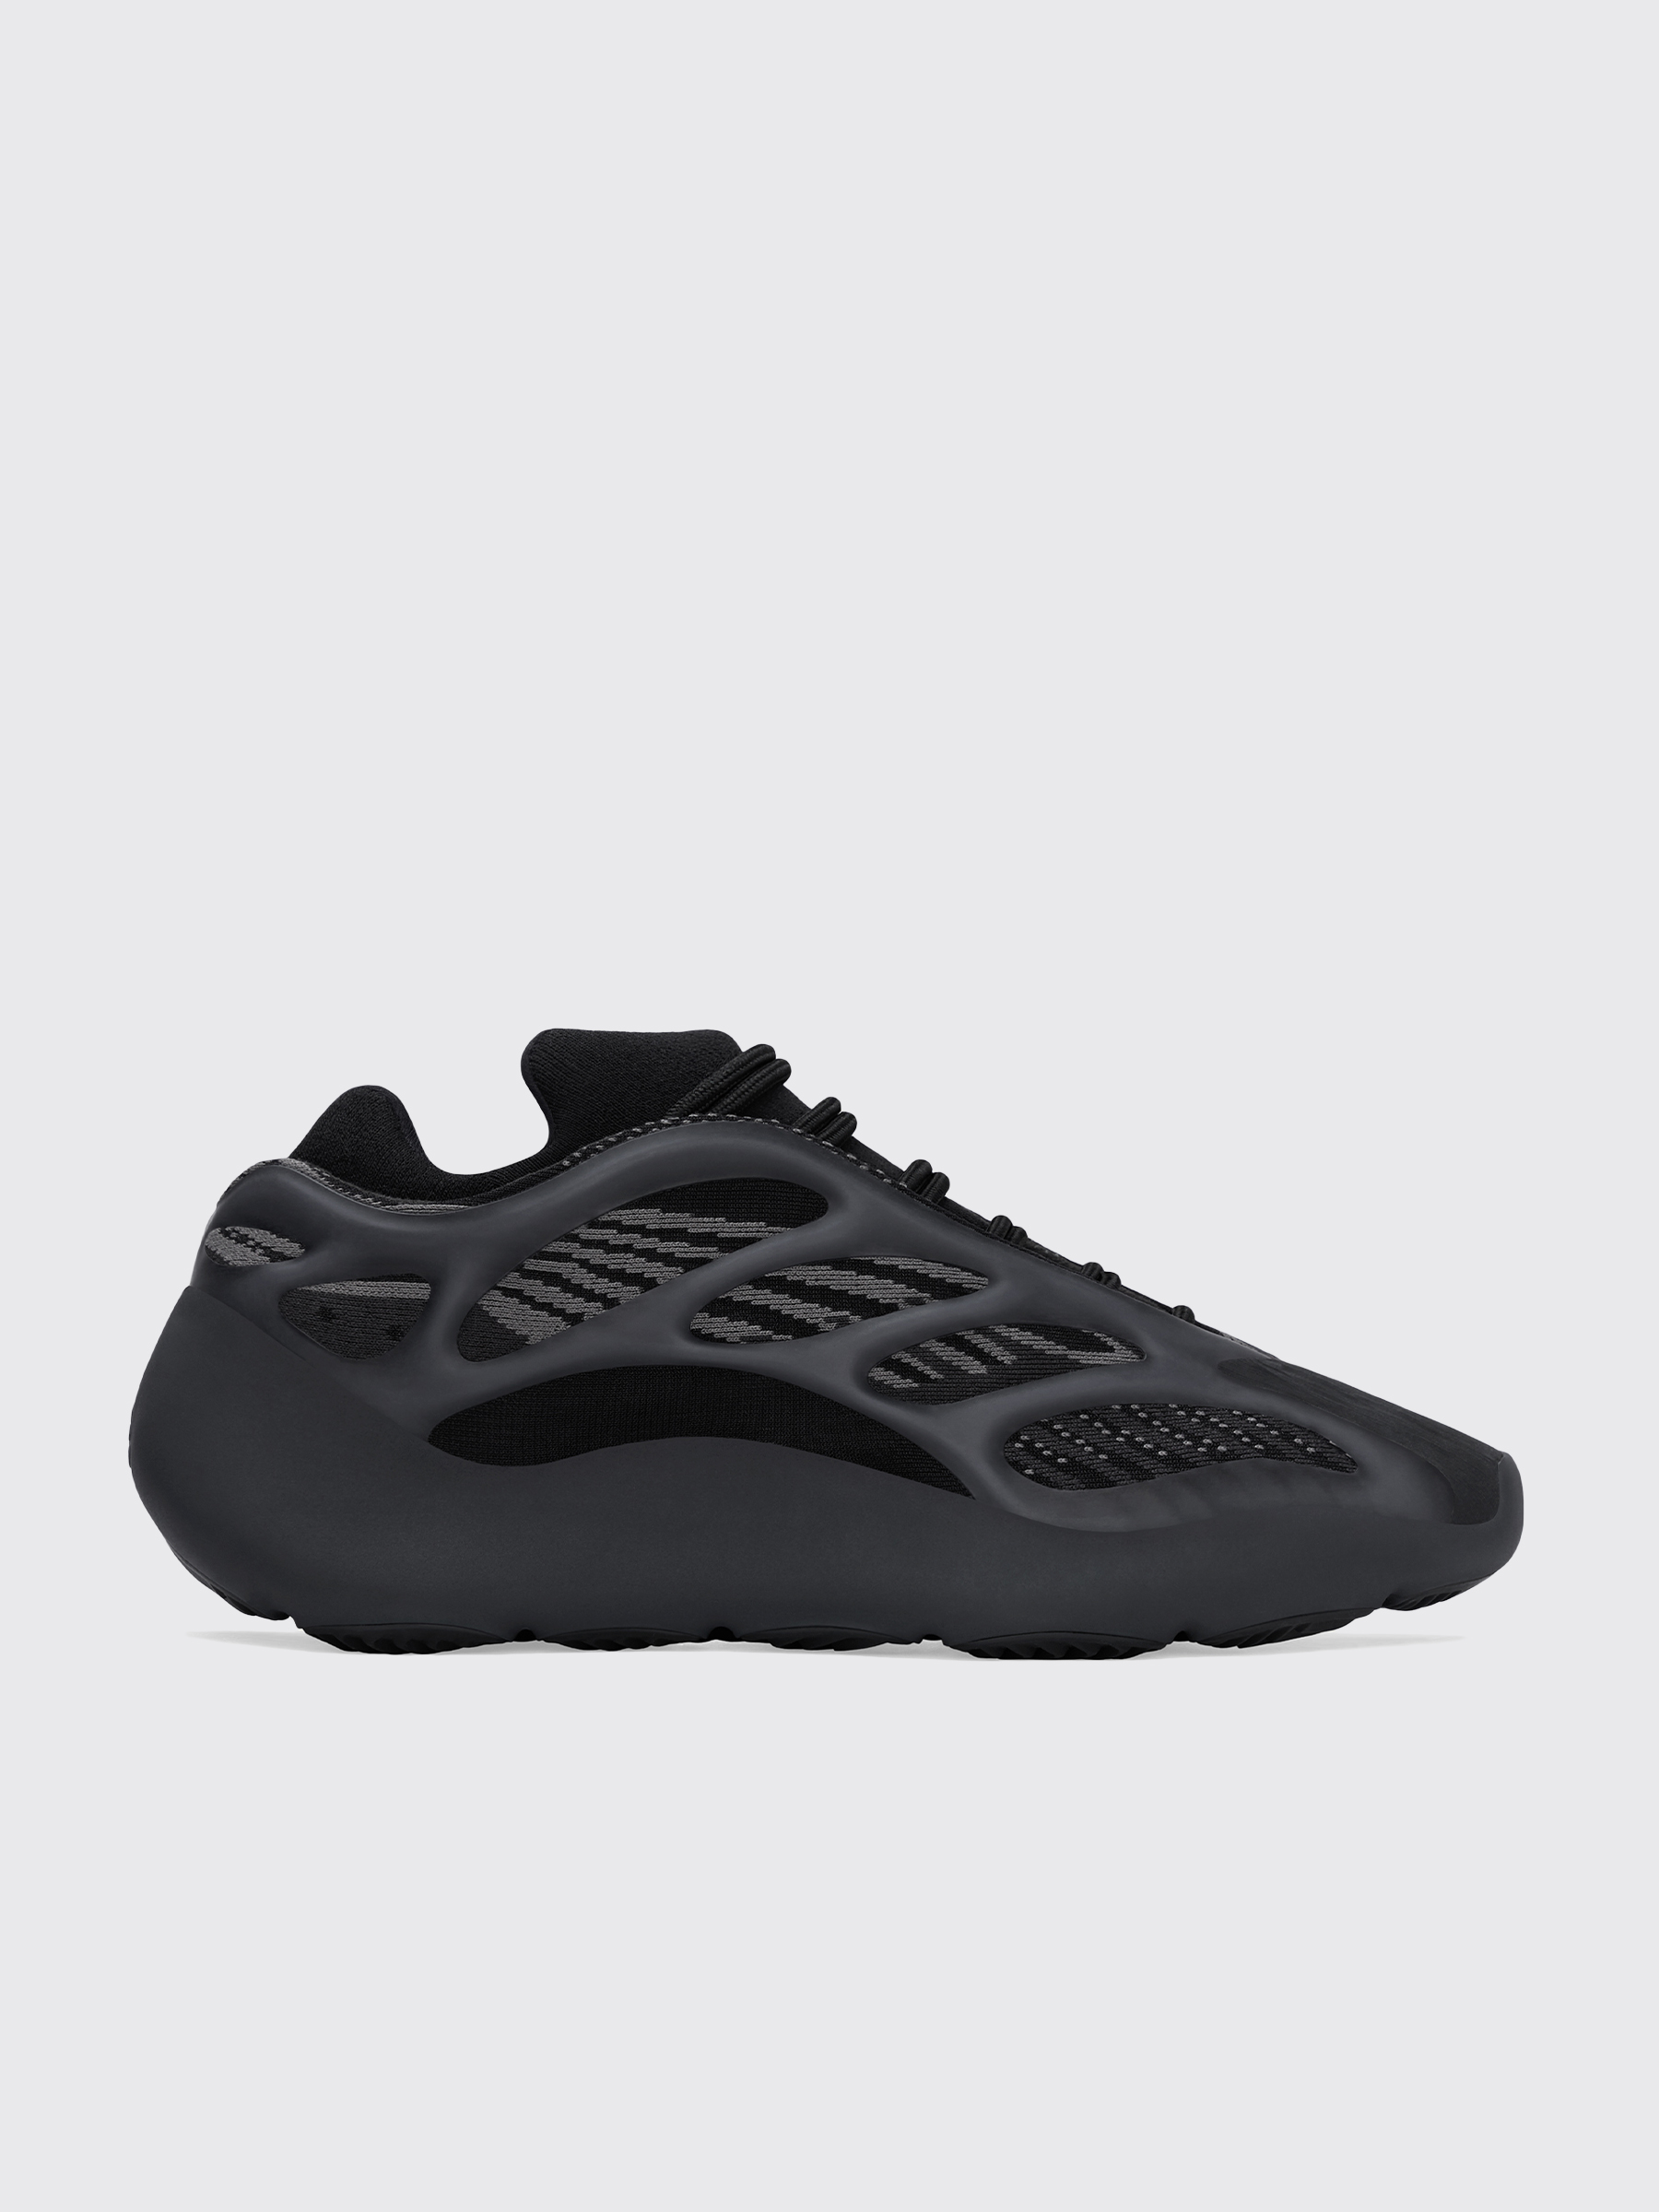 all black yeezy 700 fast shipping